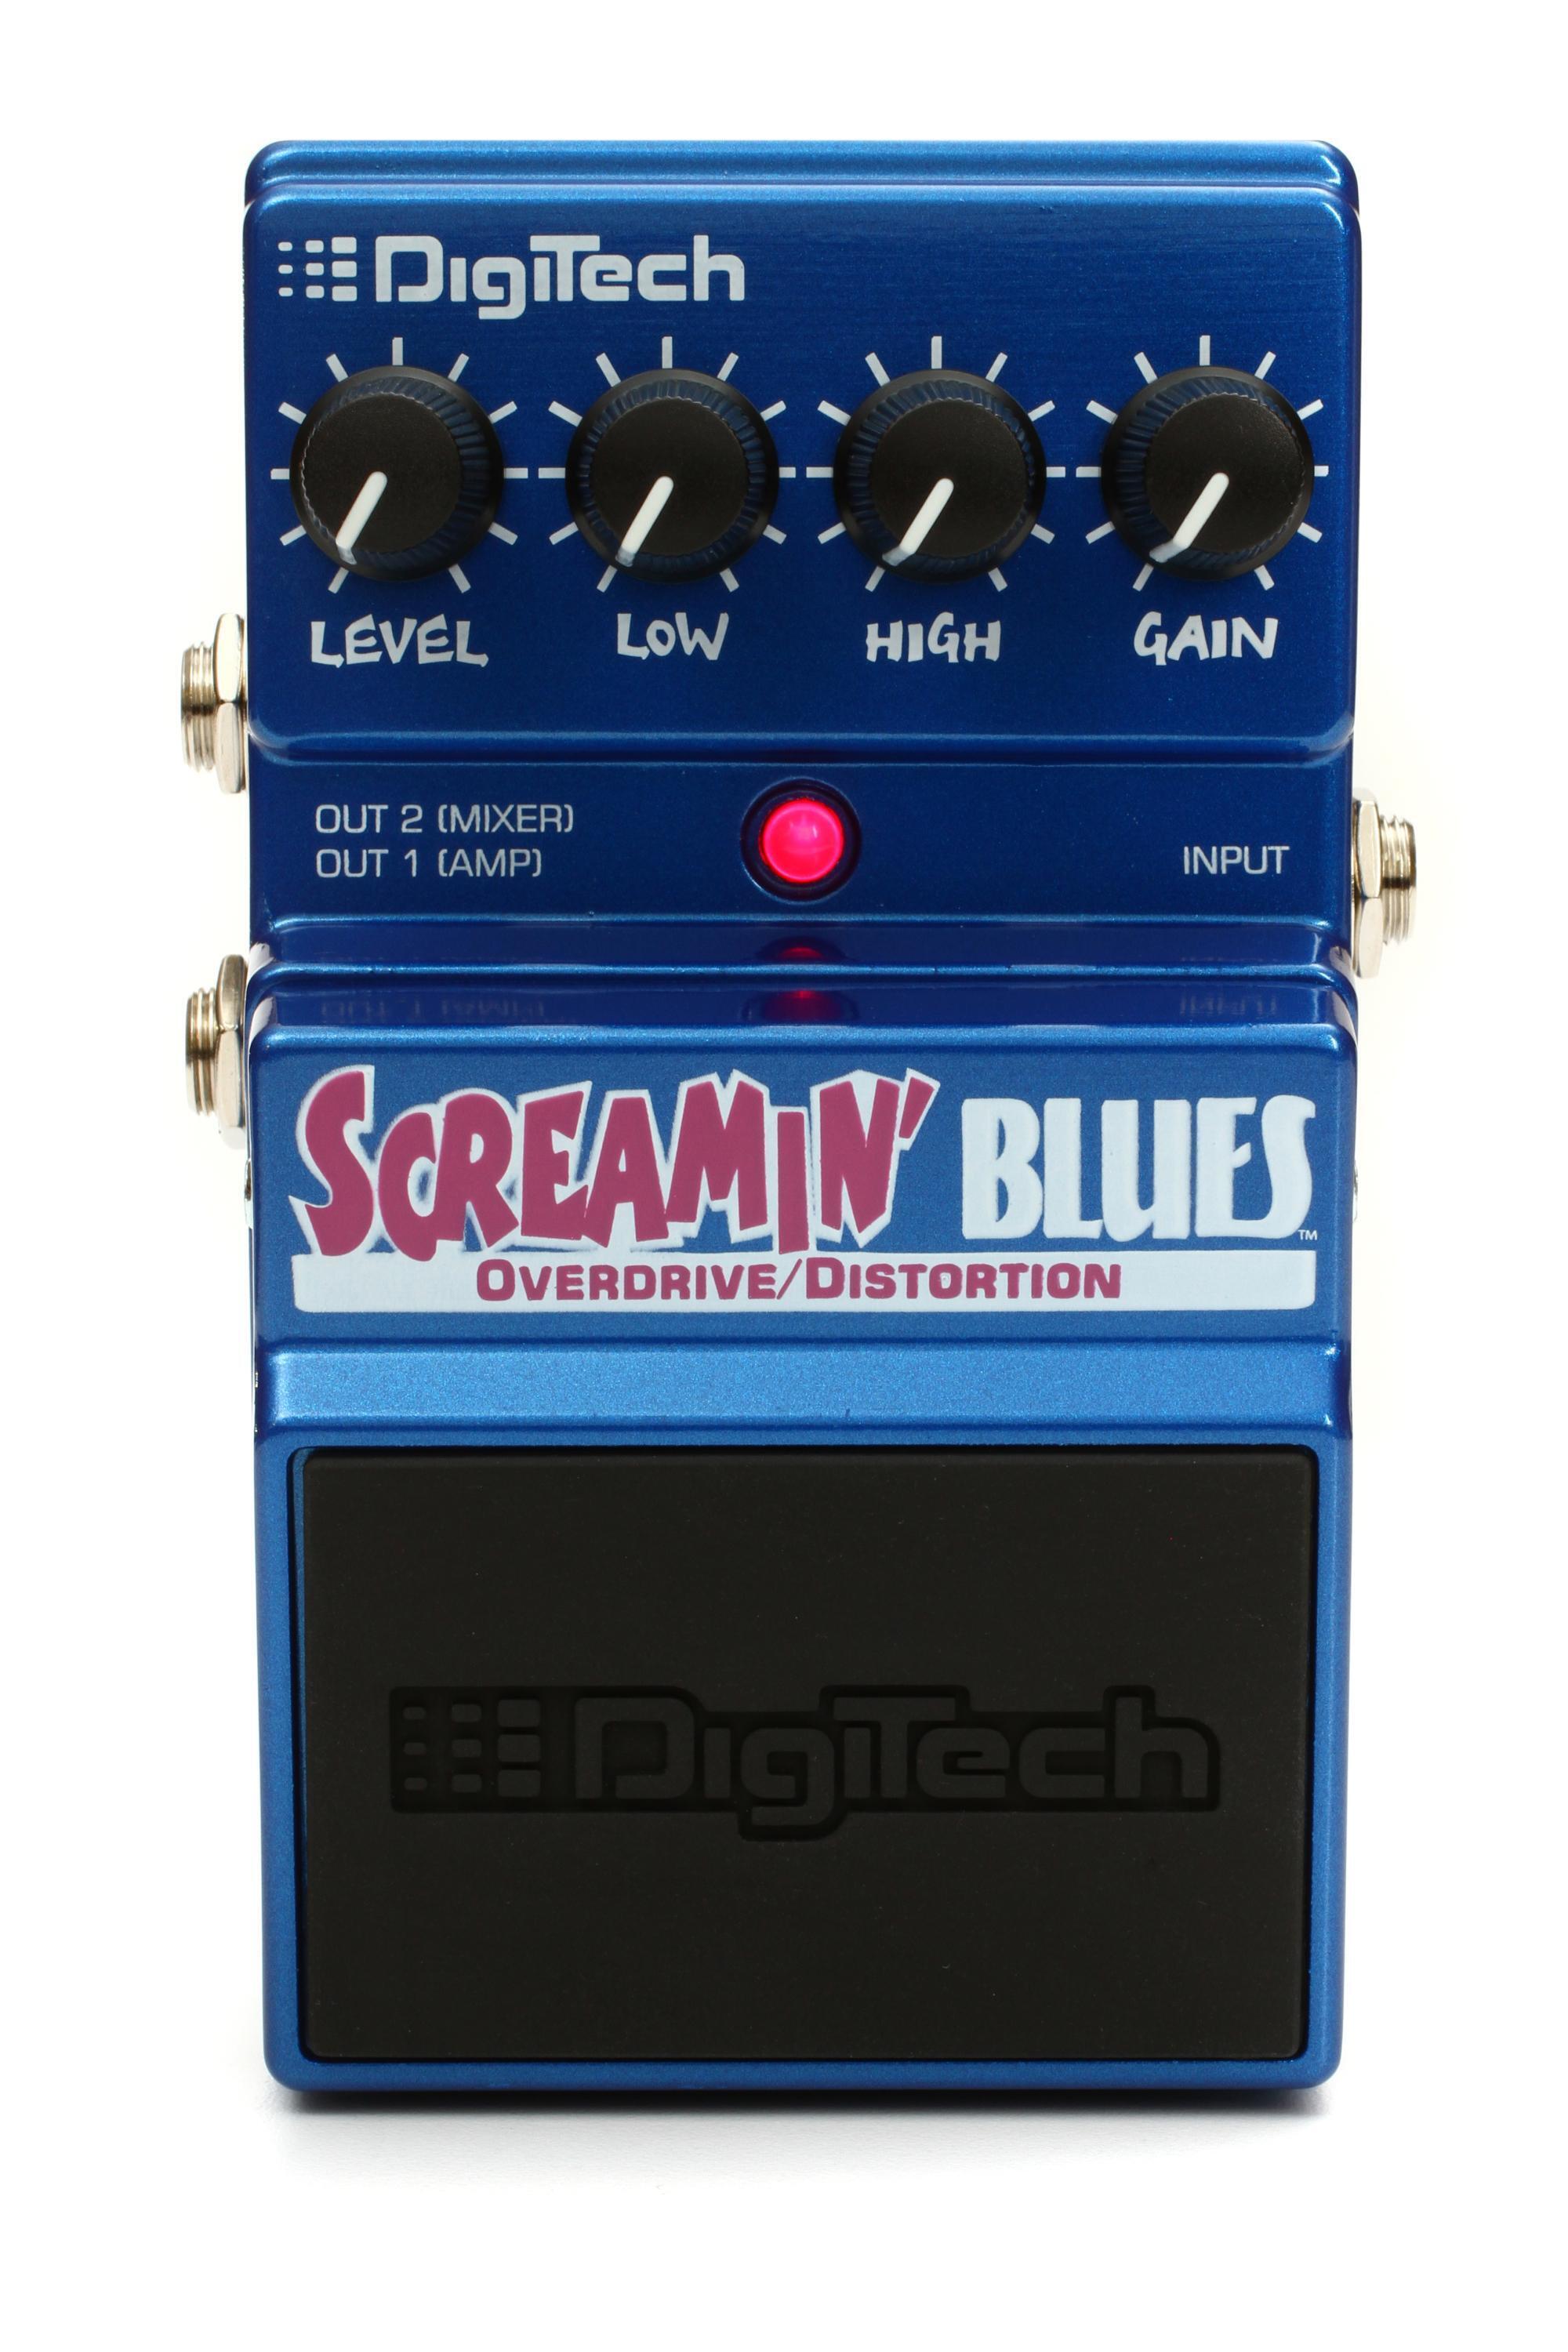 DigiTech Screamin' Blues Overdrive/Distortion | Sweetwater